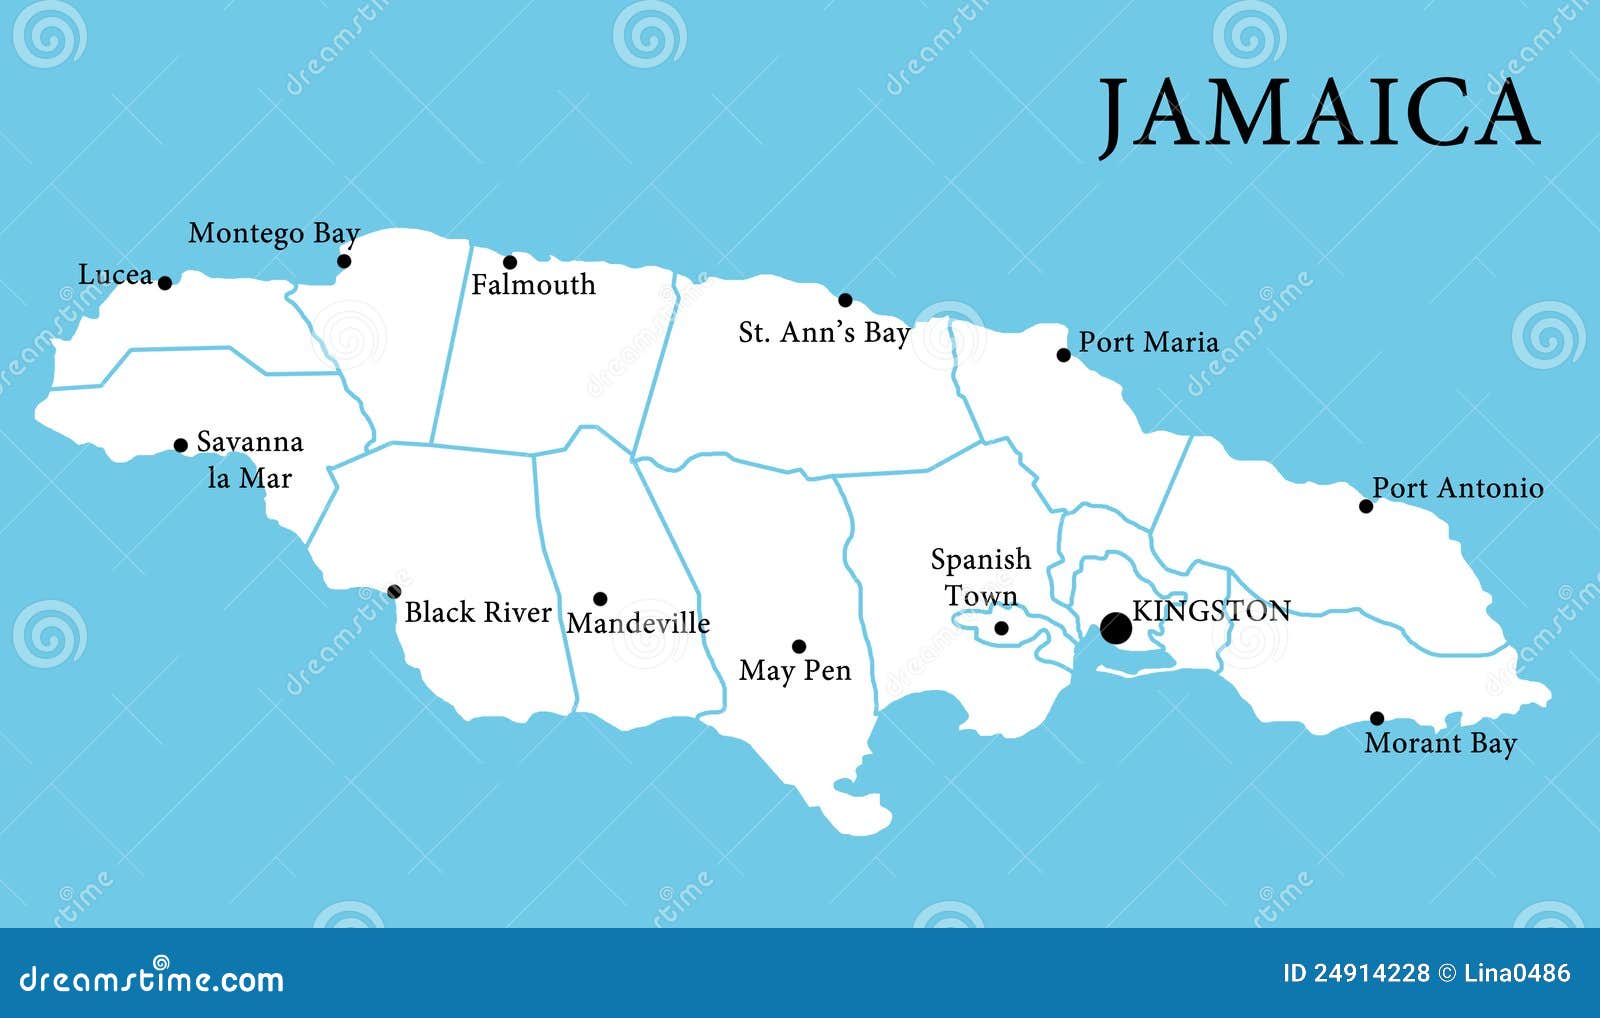 clipart map of jamaica - photo #3